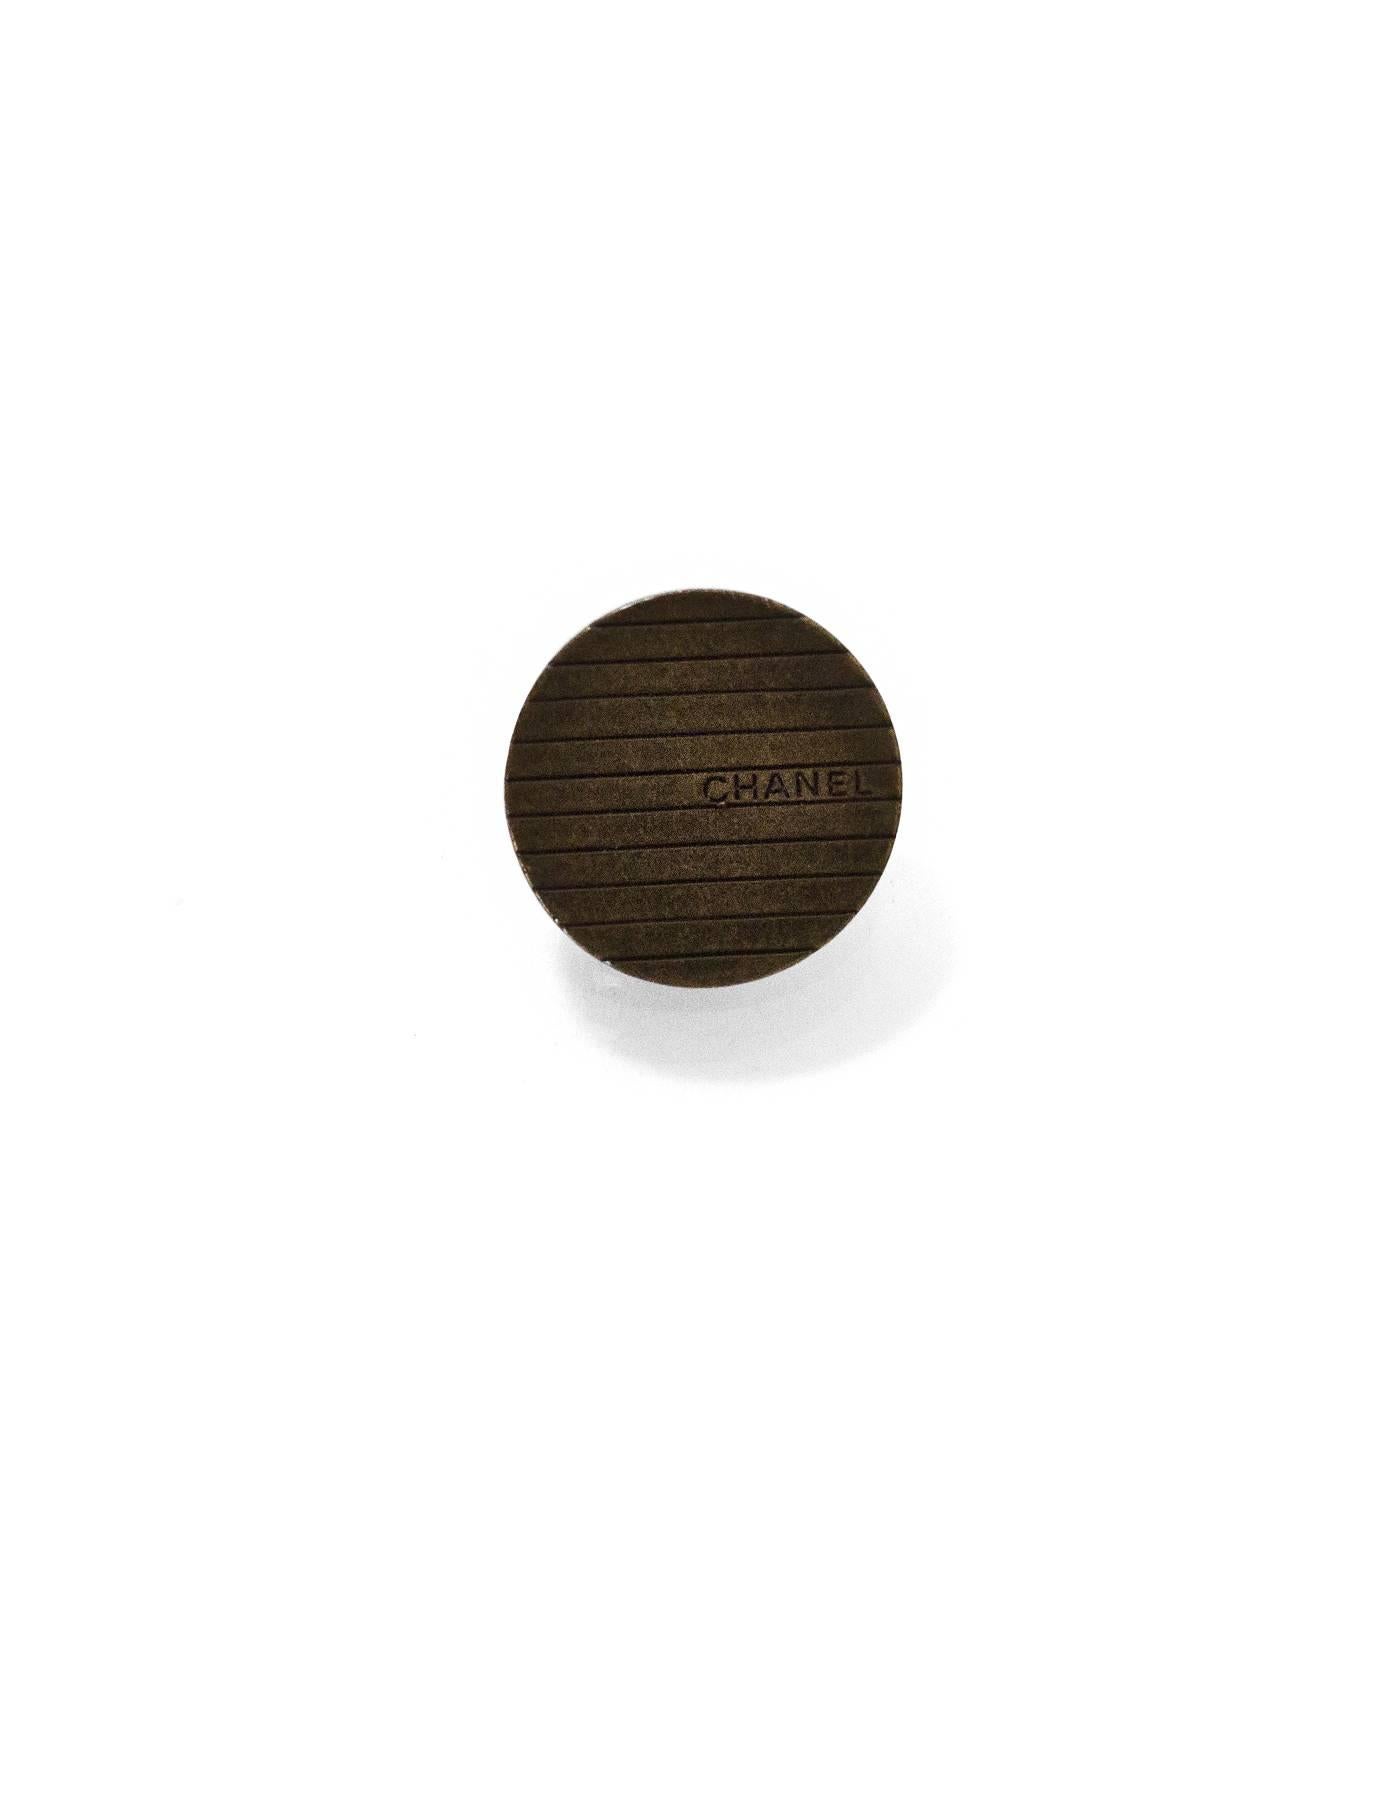 Chanel Brasstone Stripe Buttons
Features set of six 18mm buttons

Color: Brass
Hardware: Brasstone
Materials: Metal
Overall Condition: Excellent good pre-owned condition, light surface marks

Measurements: 
Diameter: 18mm